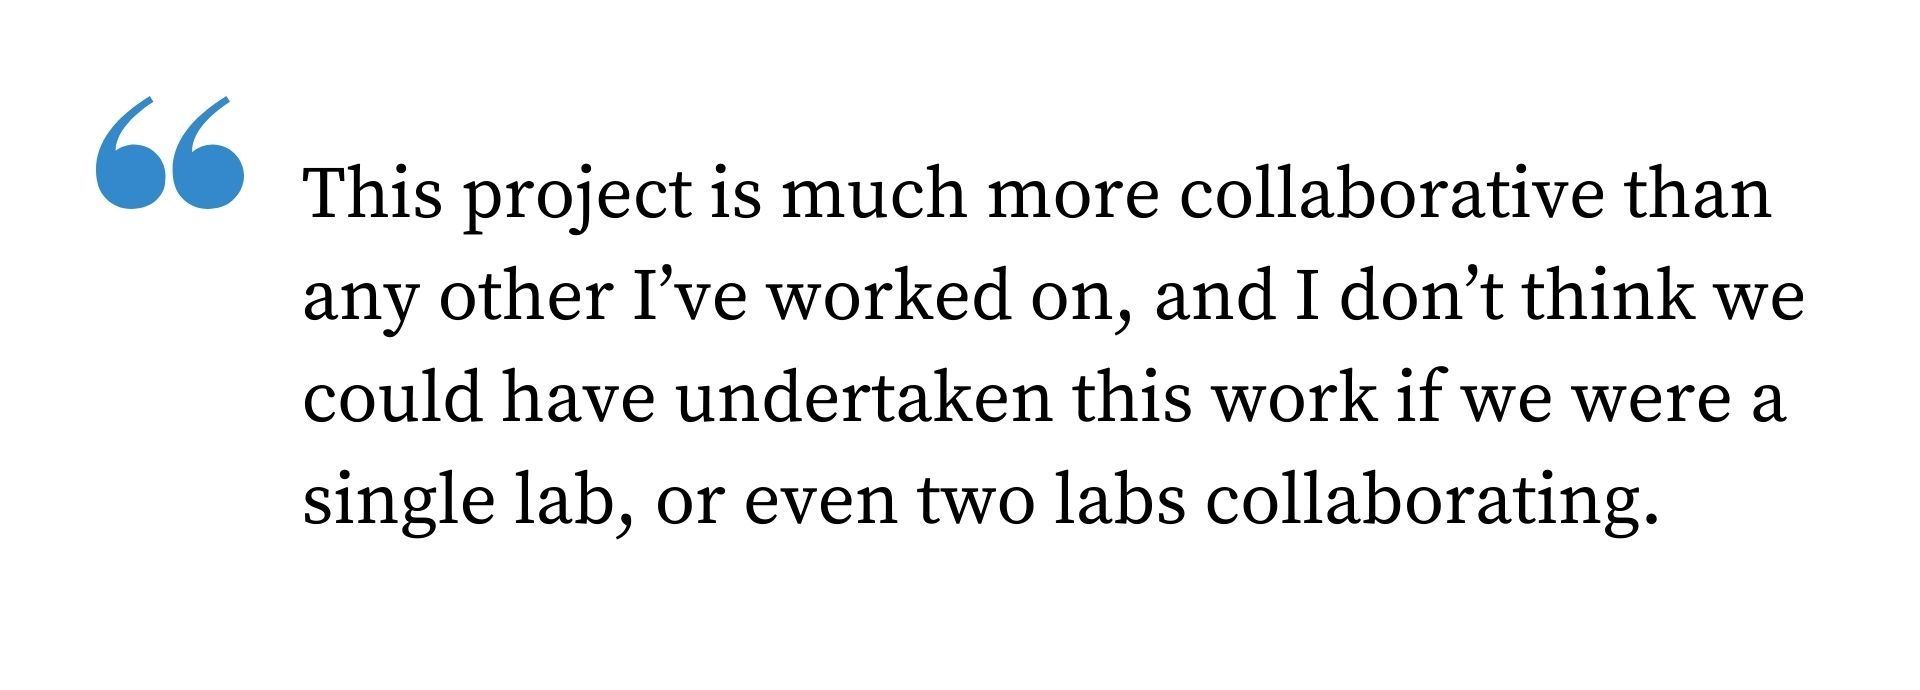 Quote from the text: This project is much more collaborative than any other I've worked on, and I don't think we could have undertaken this work if we were a single lab, or even two labs collaborating.